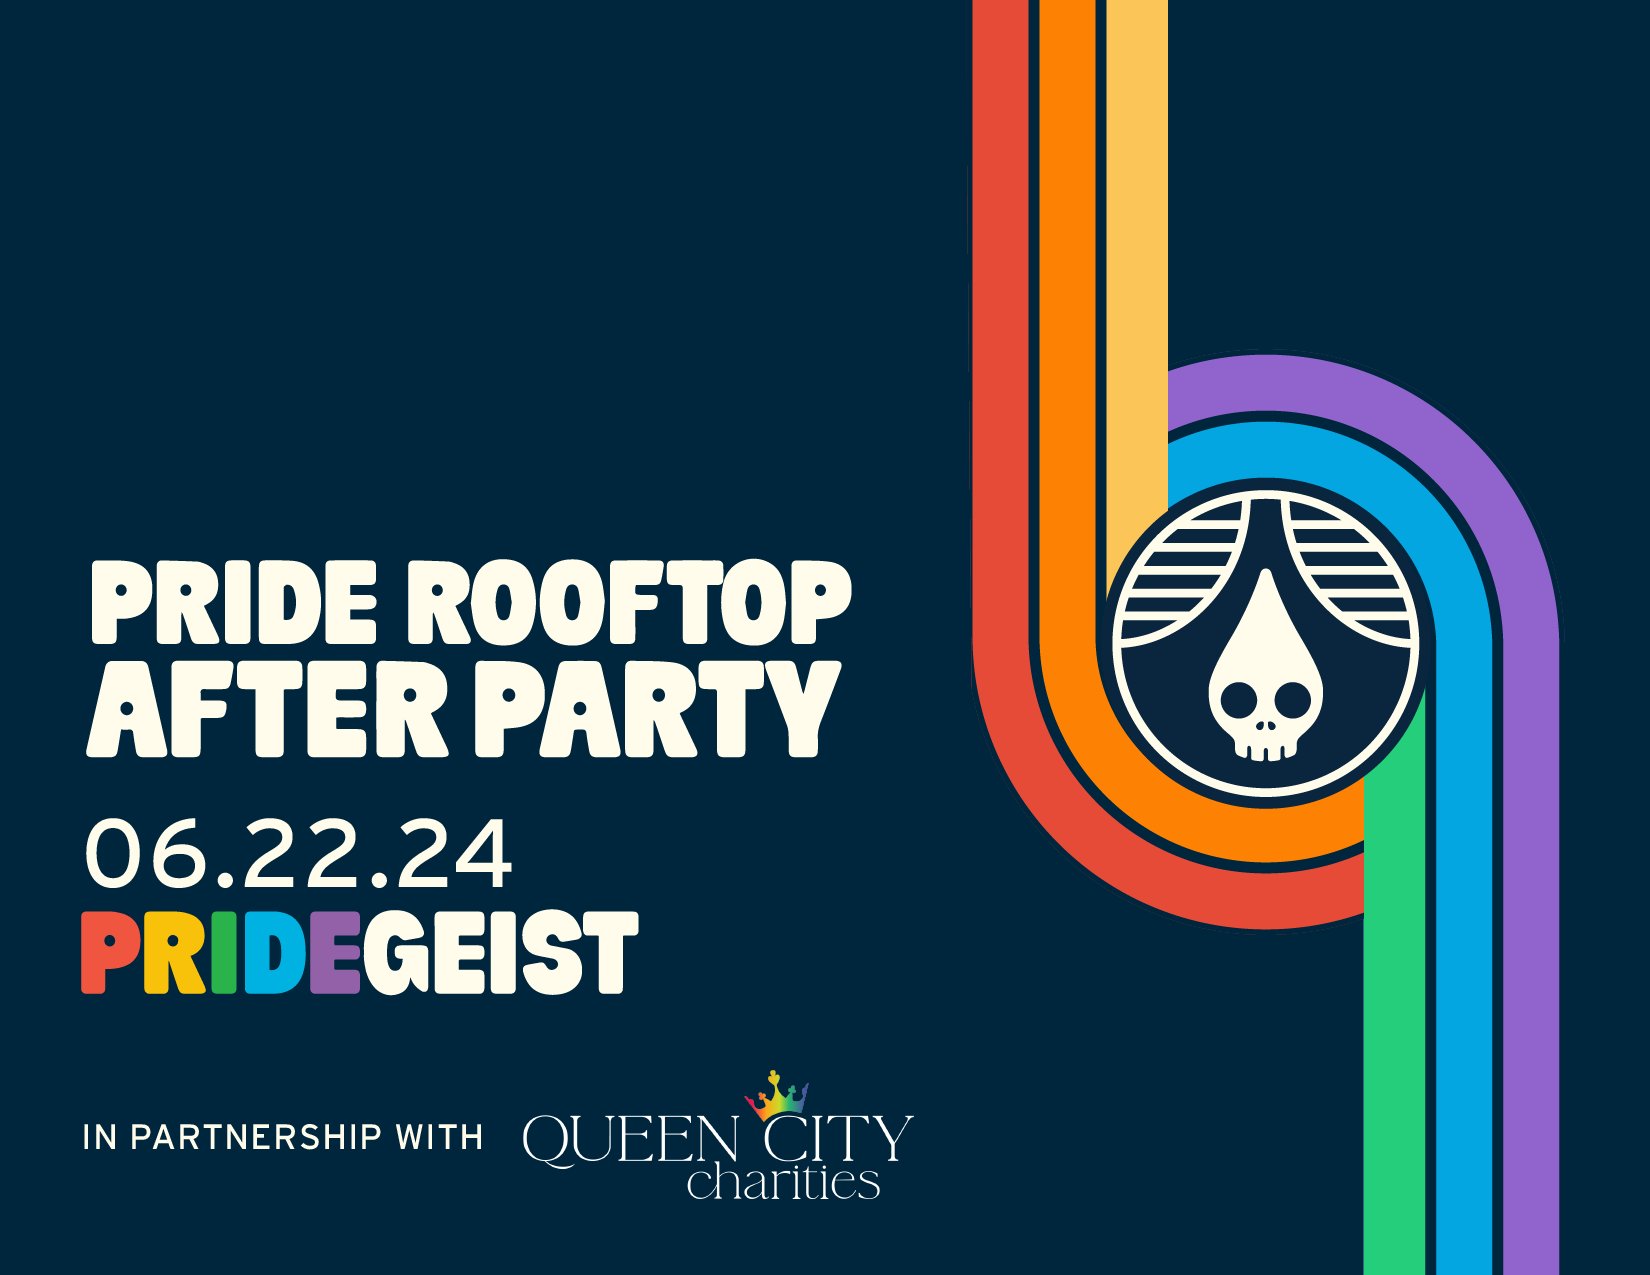 PRIDE Rooftop After Party with Rhinegeist and Queen City Charities